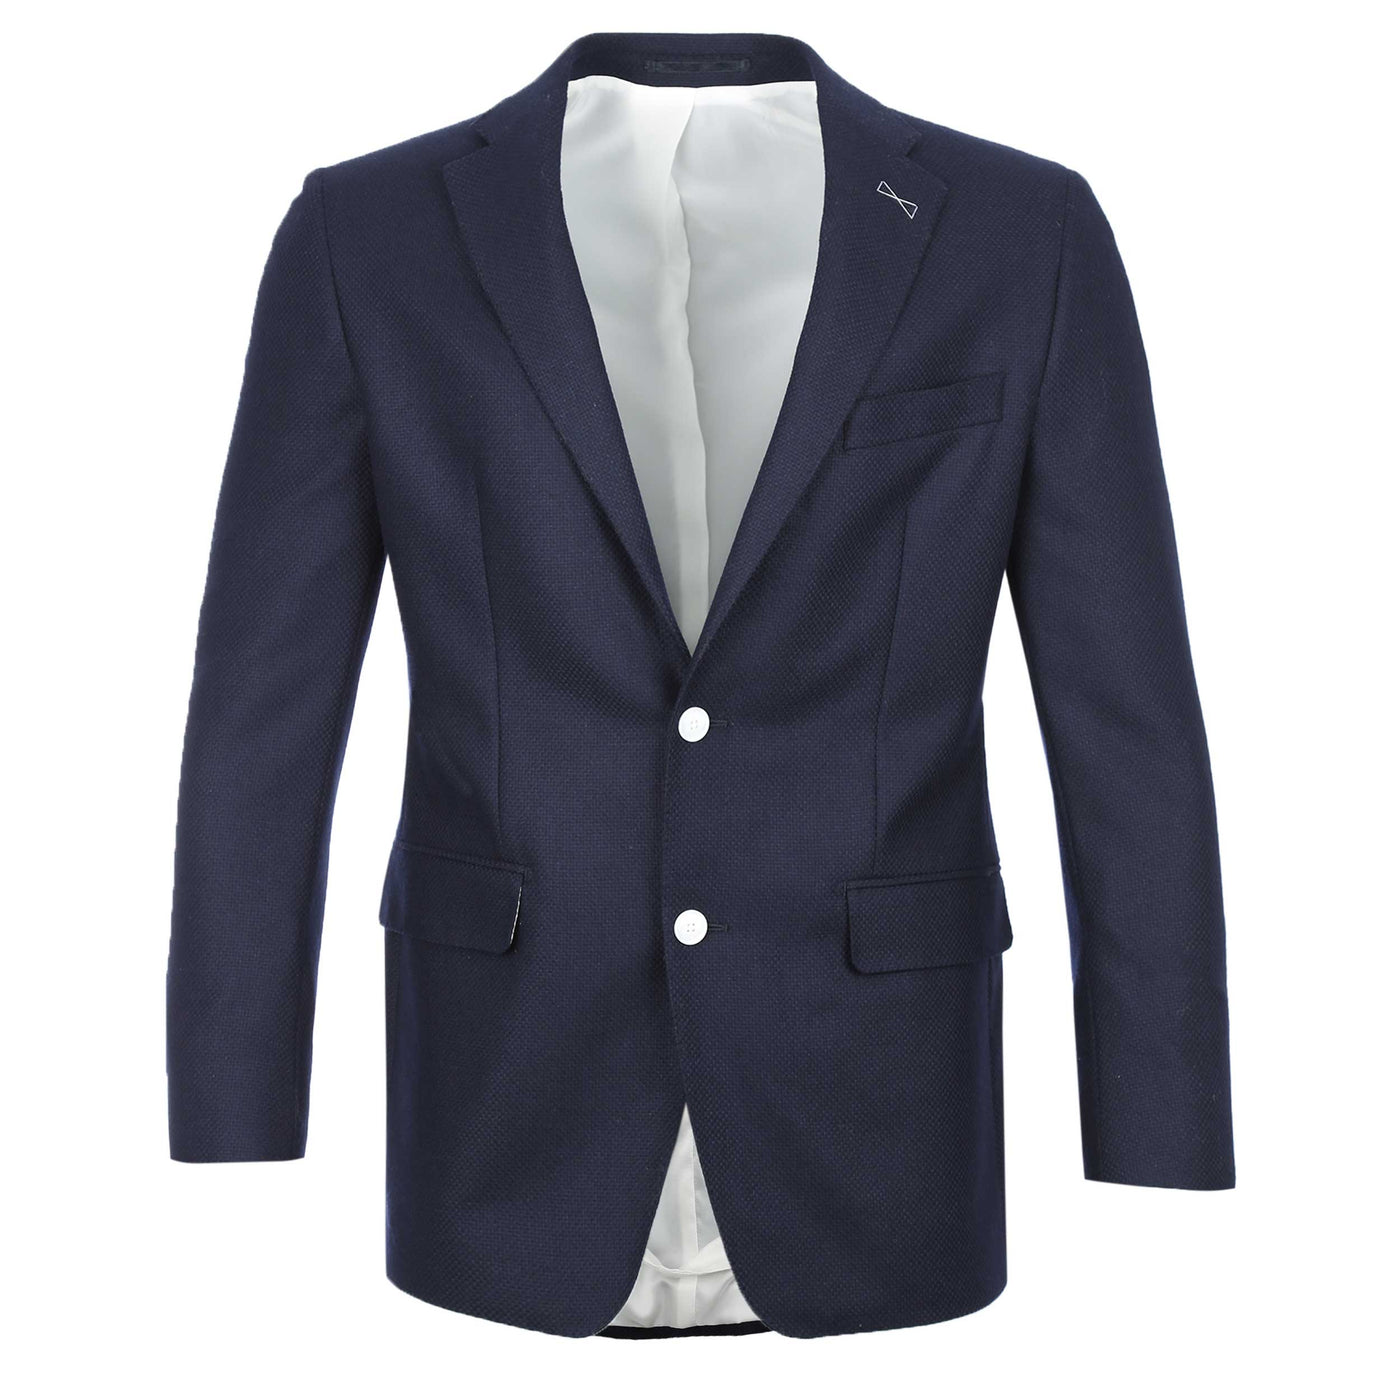 Norton Barrie Bespoke Jacket in Navy with White Buttons